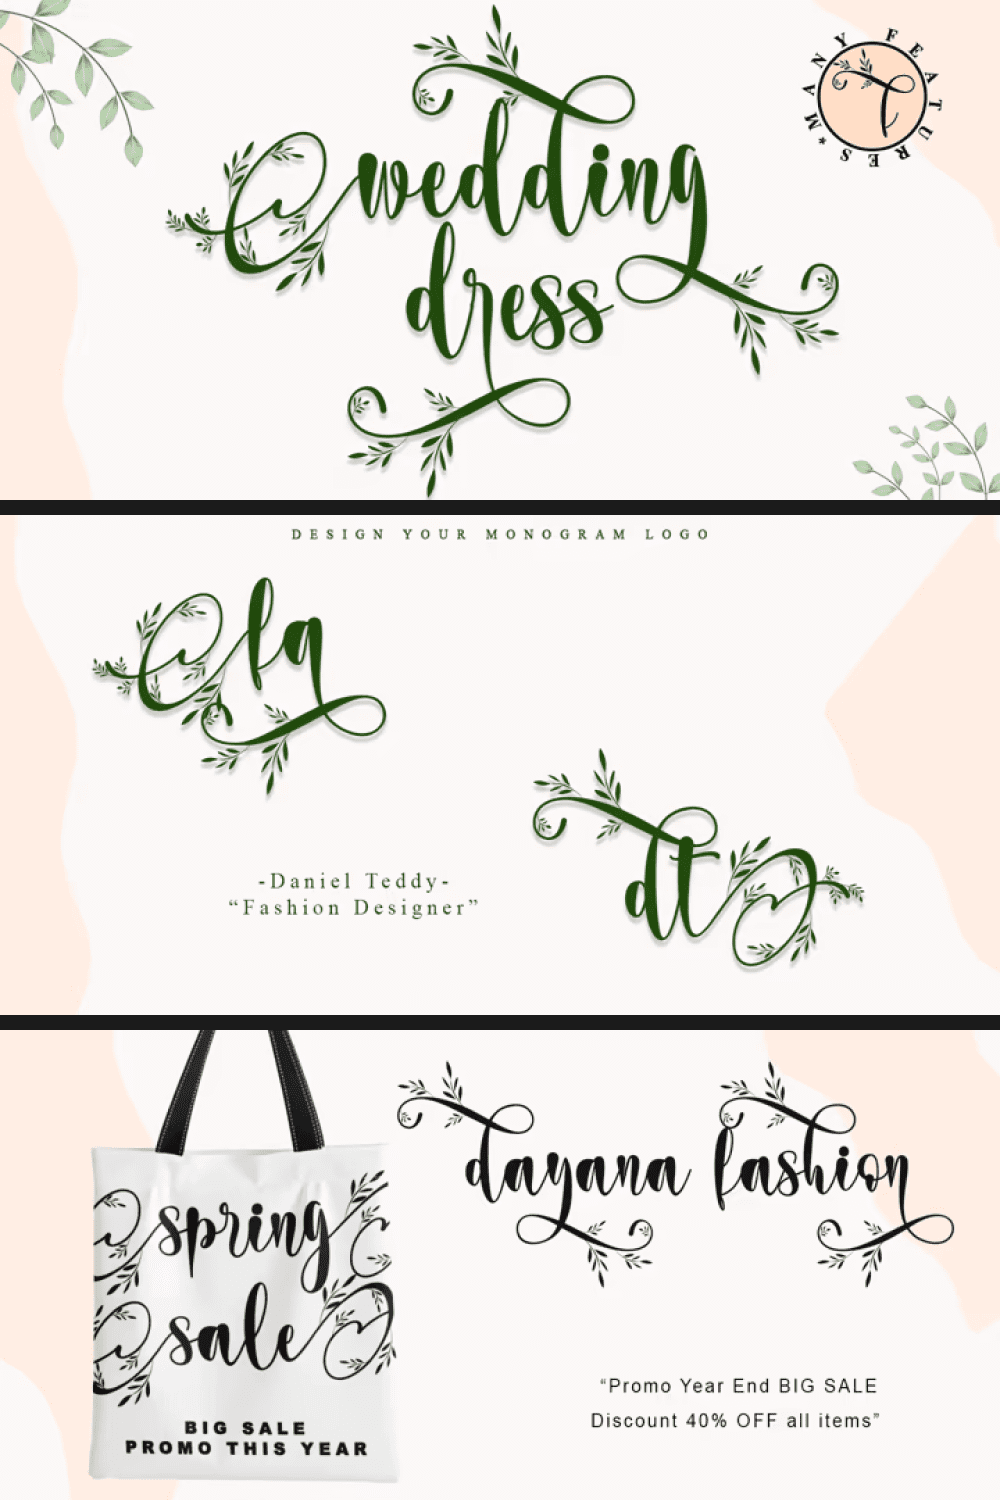 Perfect wedding invitations for a spring wedding with newly opened trees and first flowers.